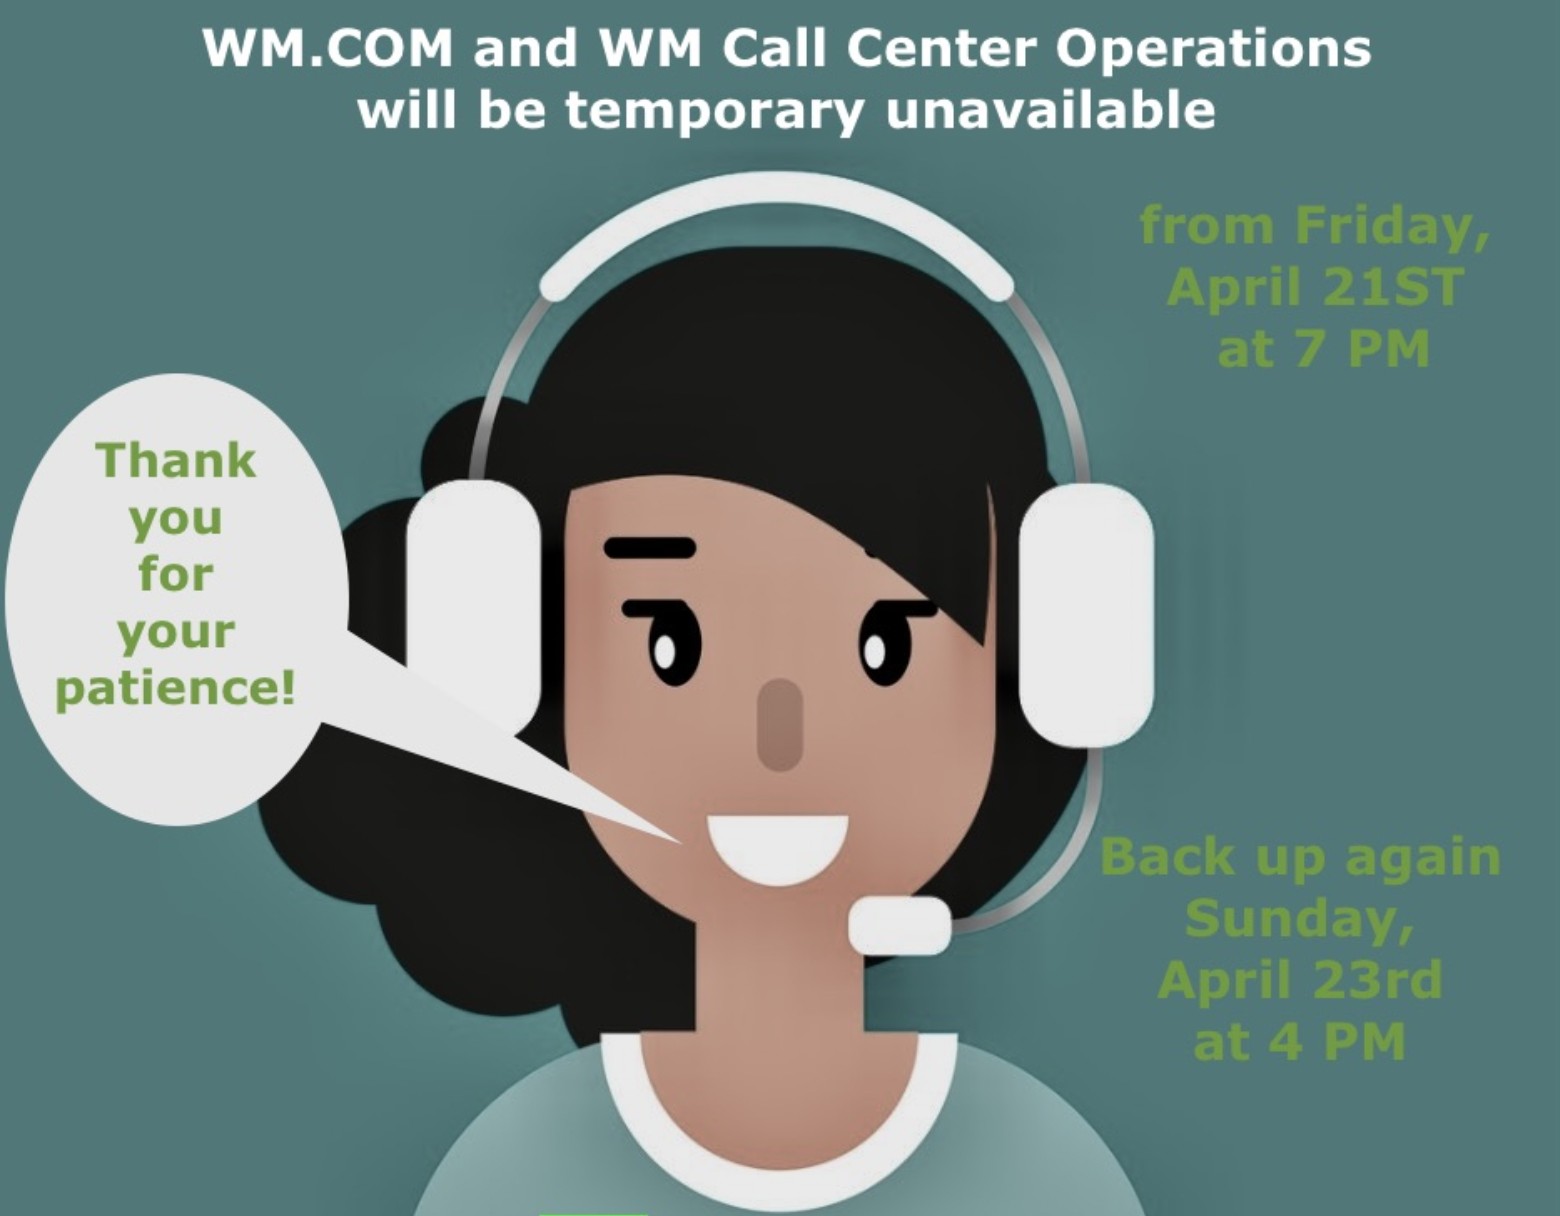 Waste Management call center down on April 21